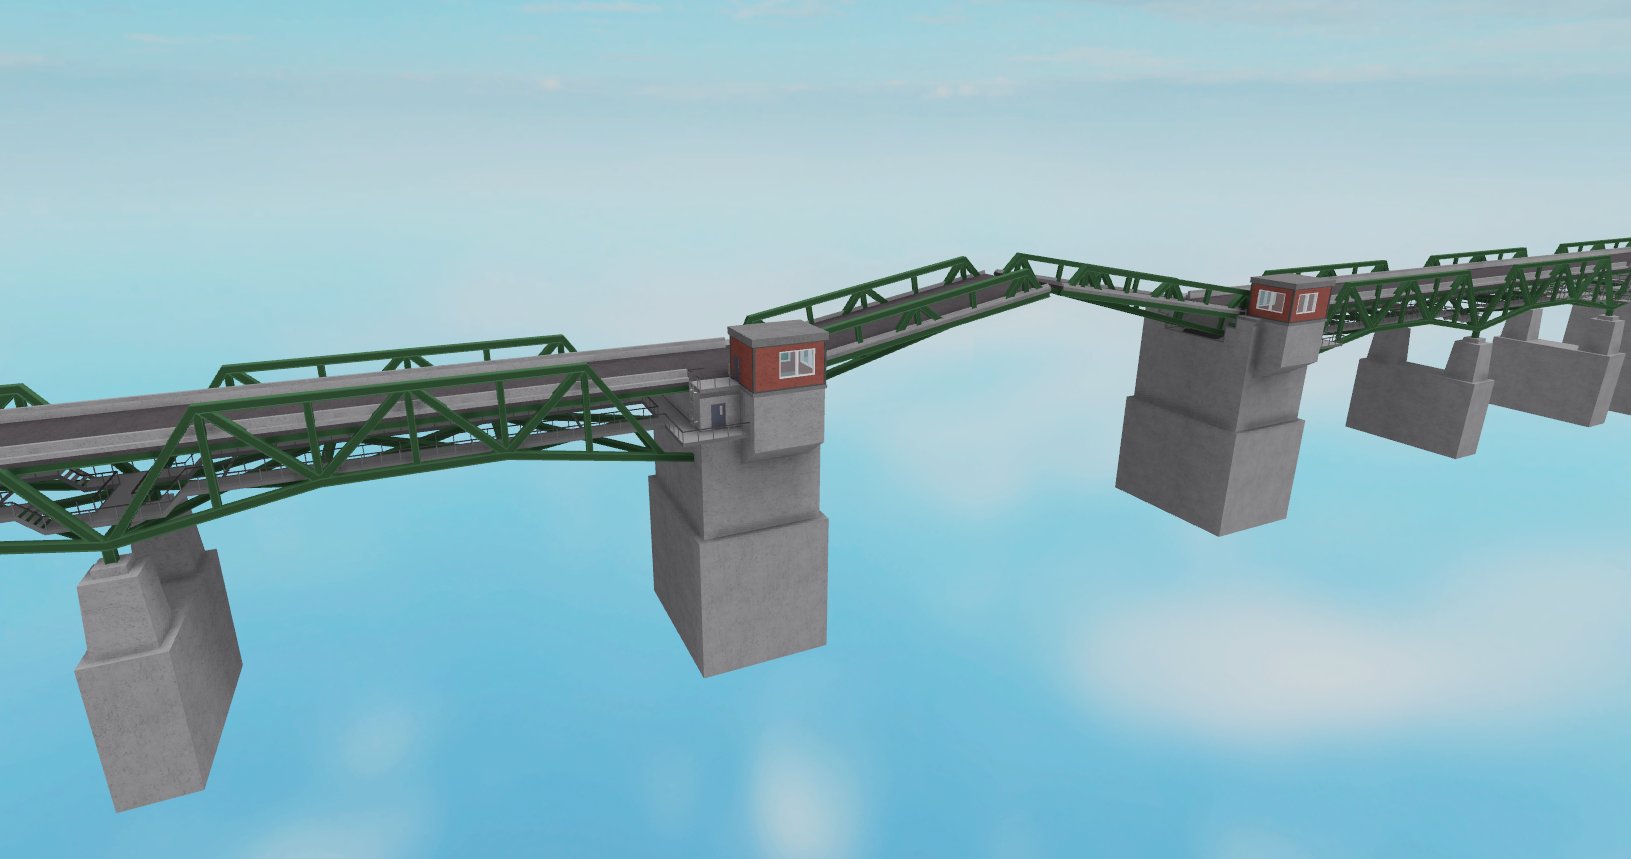 Gus Dubetz On Twitter Here S A Peek At One Of Three New Bridges For Apoc 2 This Drawbridge Will Not Be Functional At First But Perhaps In The Future It Will Be - draw bridge sign roblox